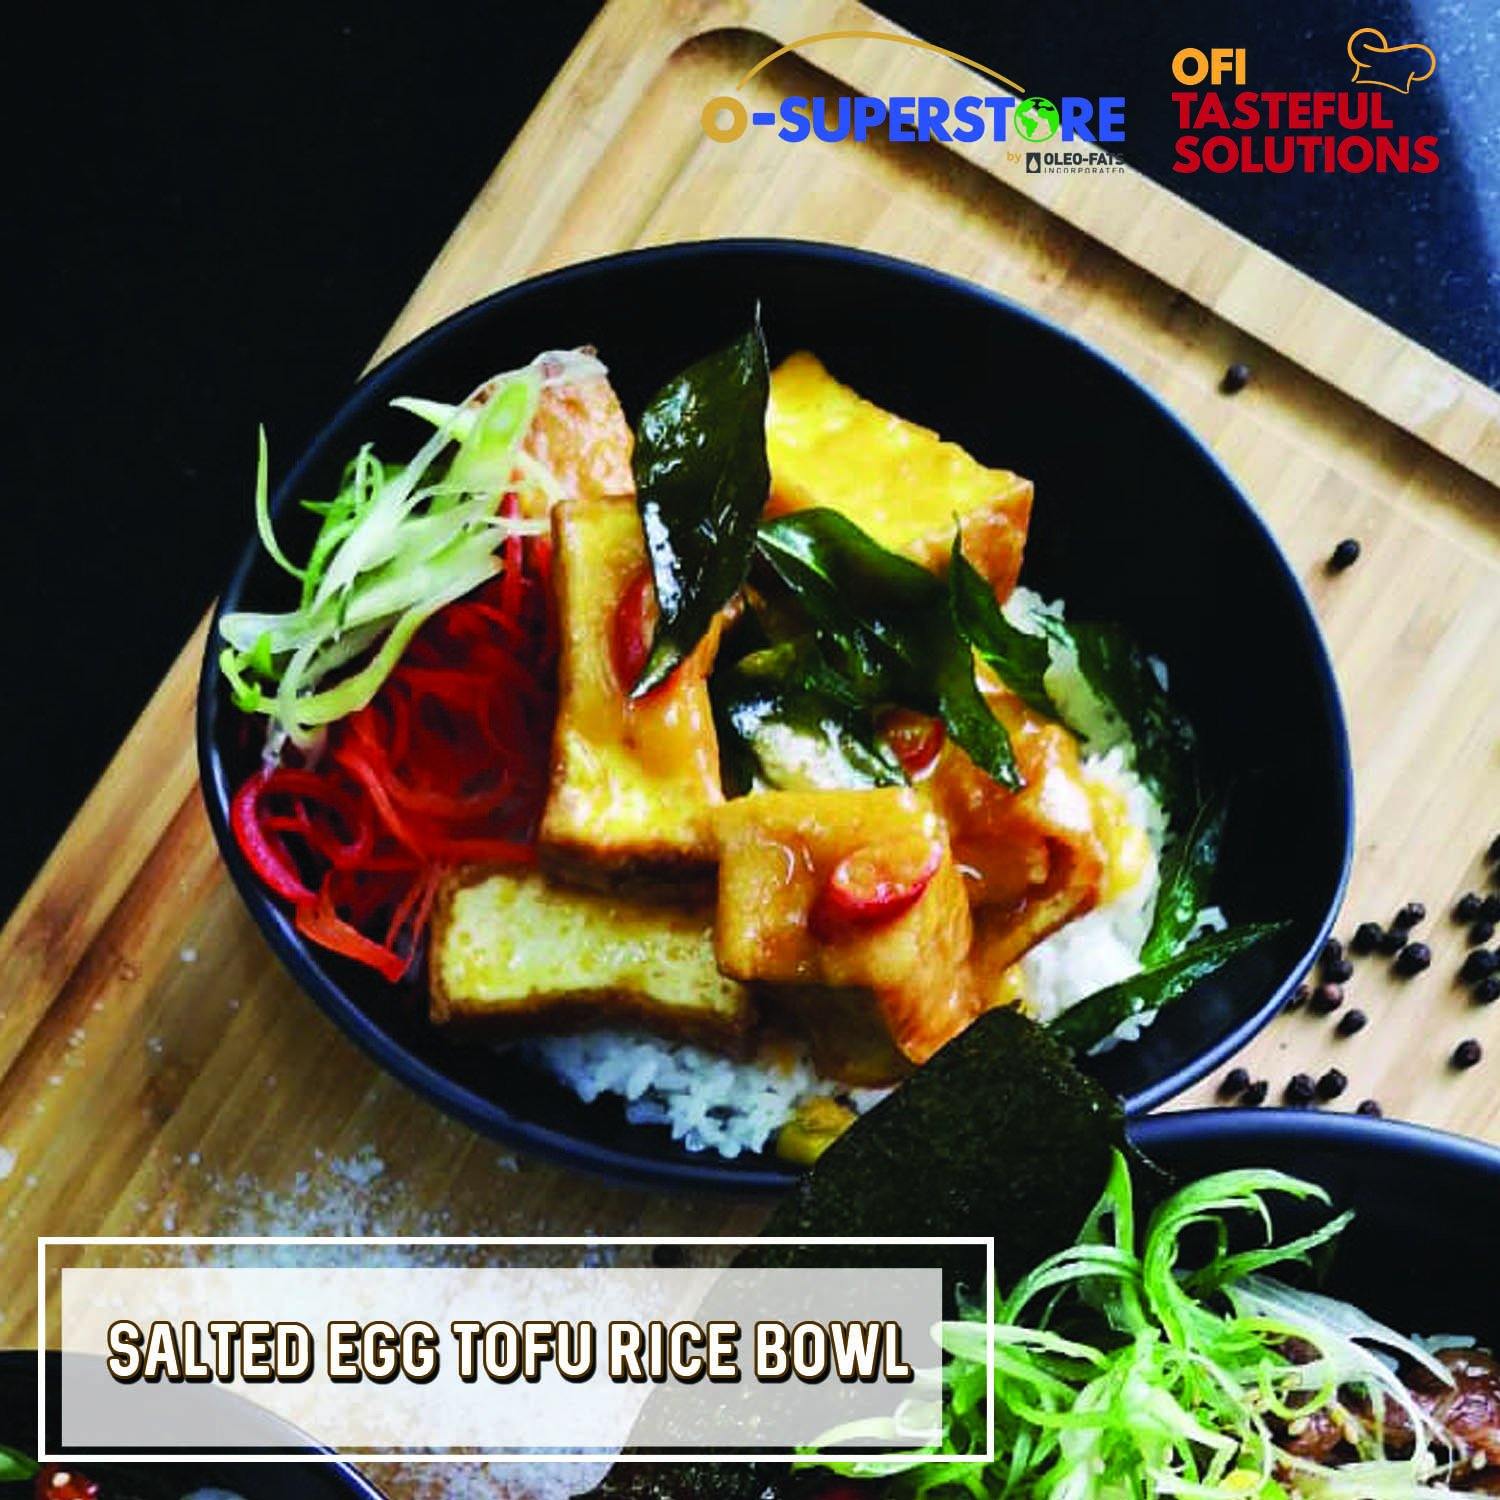 Salted Egg Tofu Rice Bowl - O-SUPERSTORE